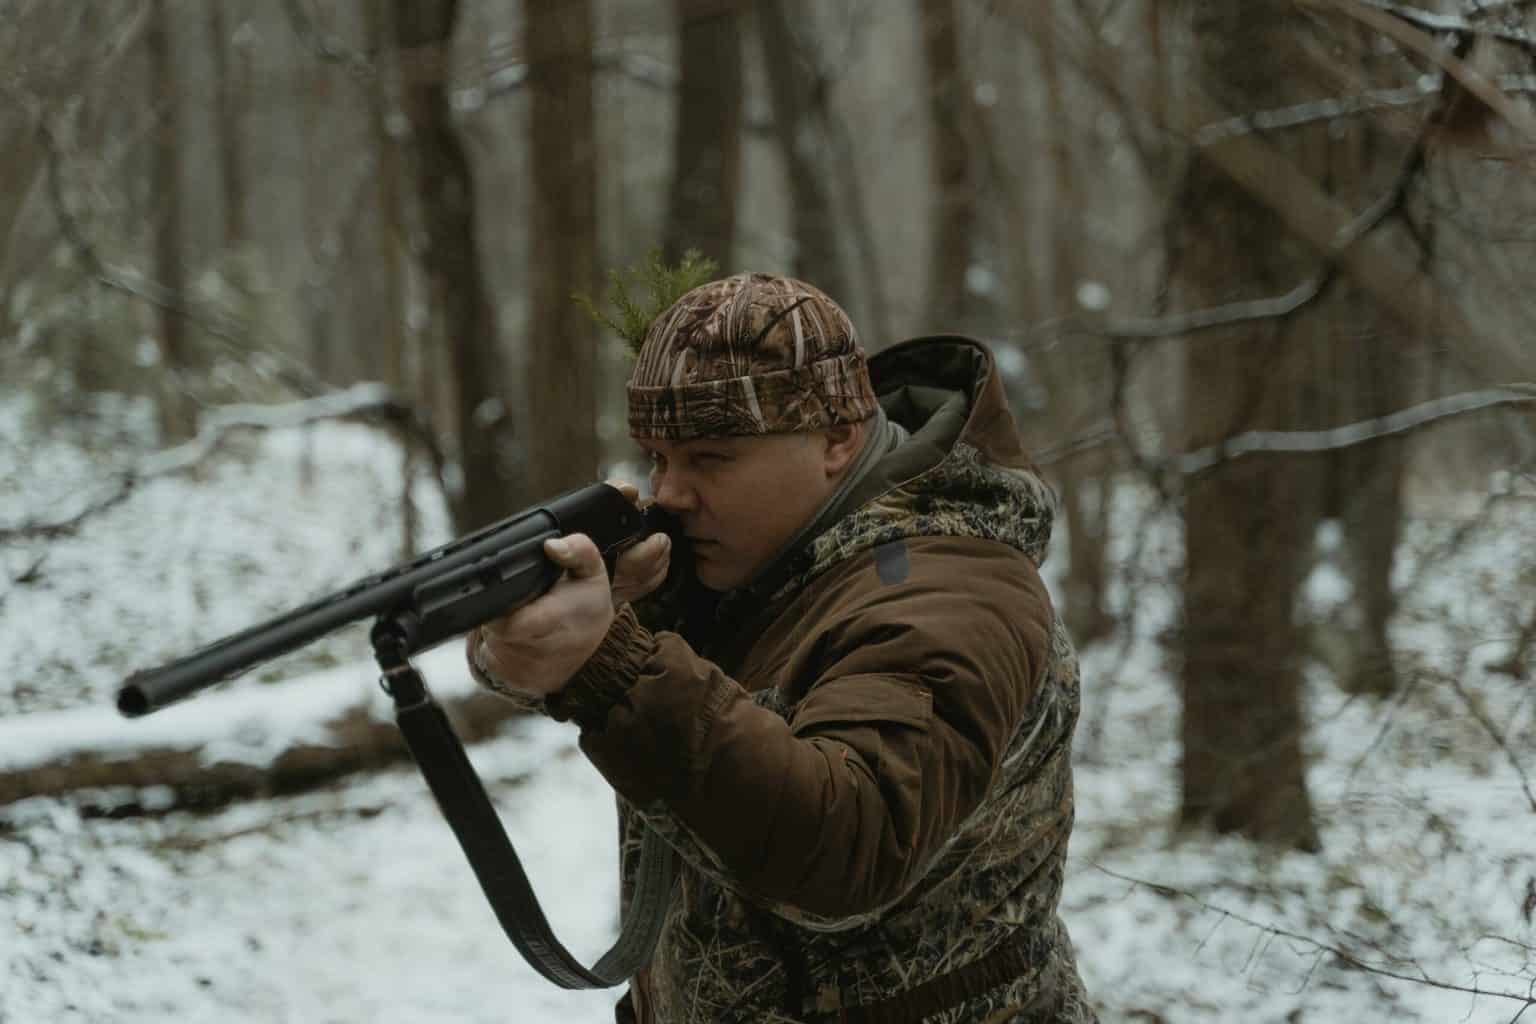 A person wearing a brown camo while aiming with a long gun